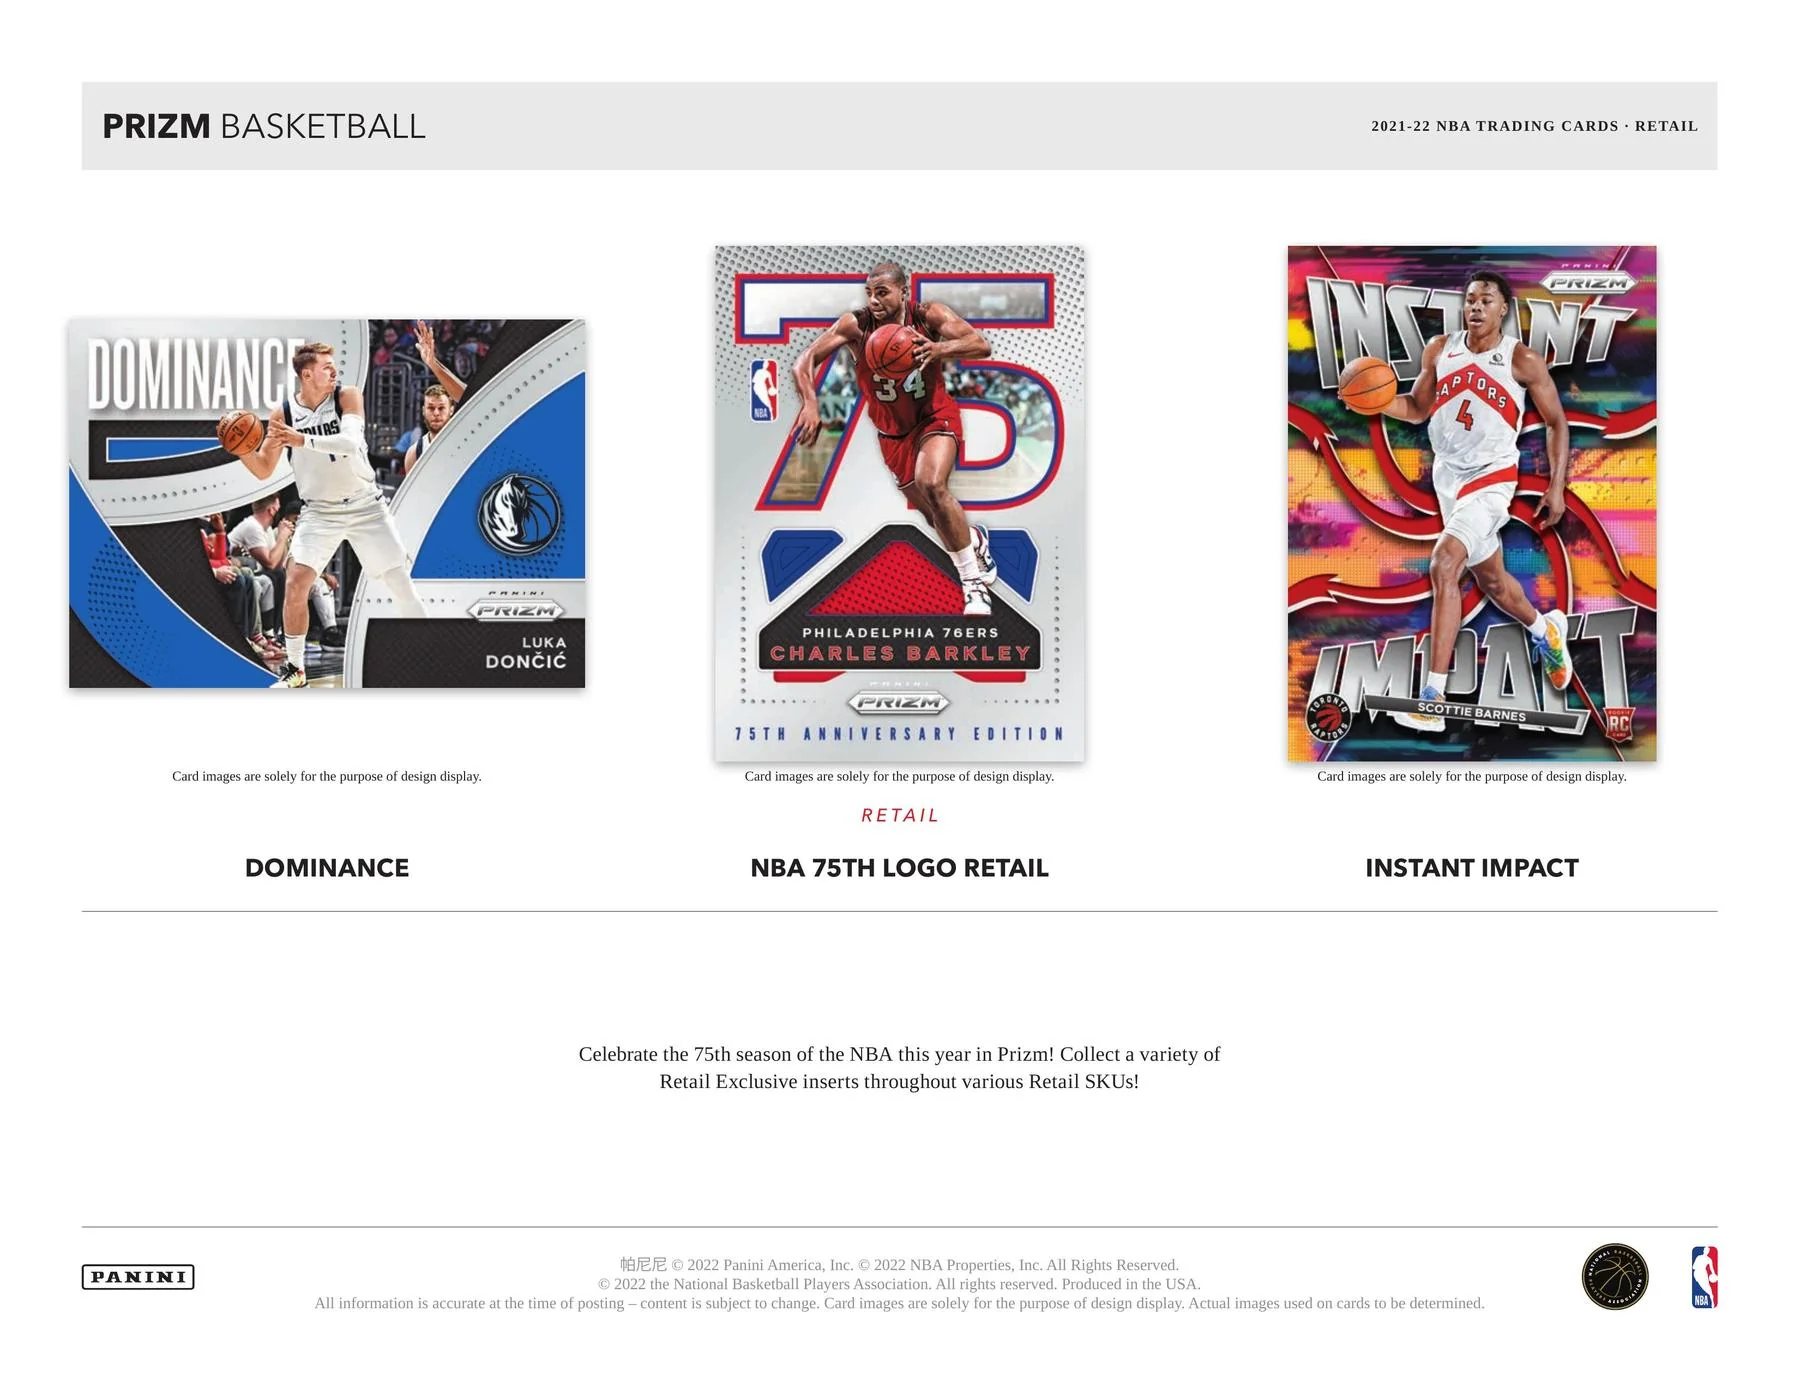 Panini Prizm Basketball Retail Booster Pack 2021/2022 Inserts